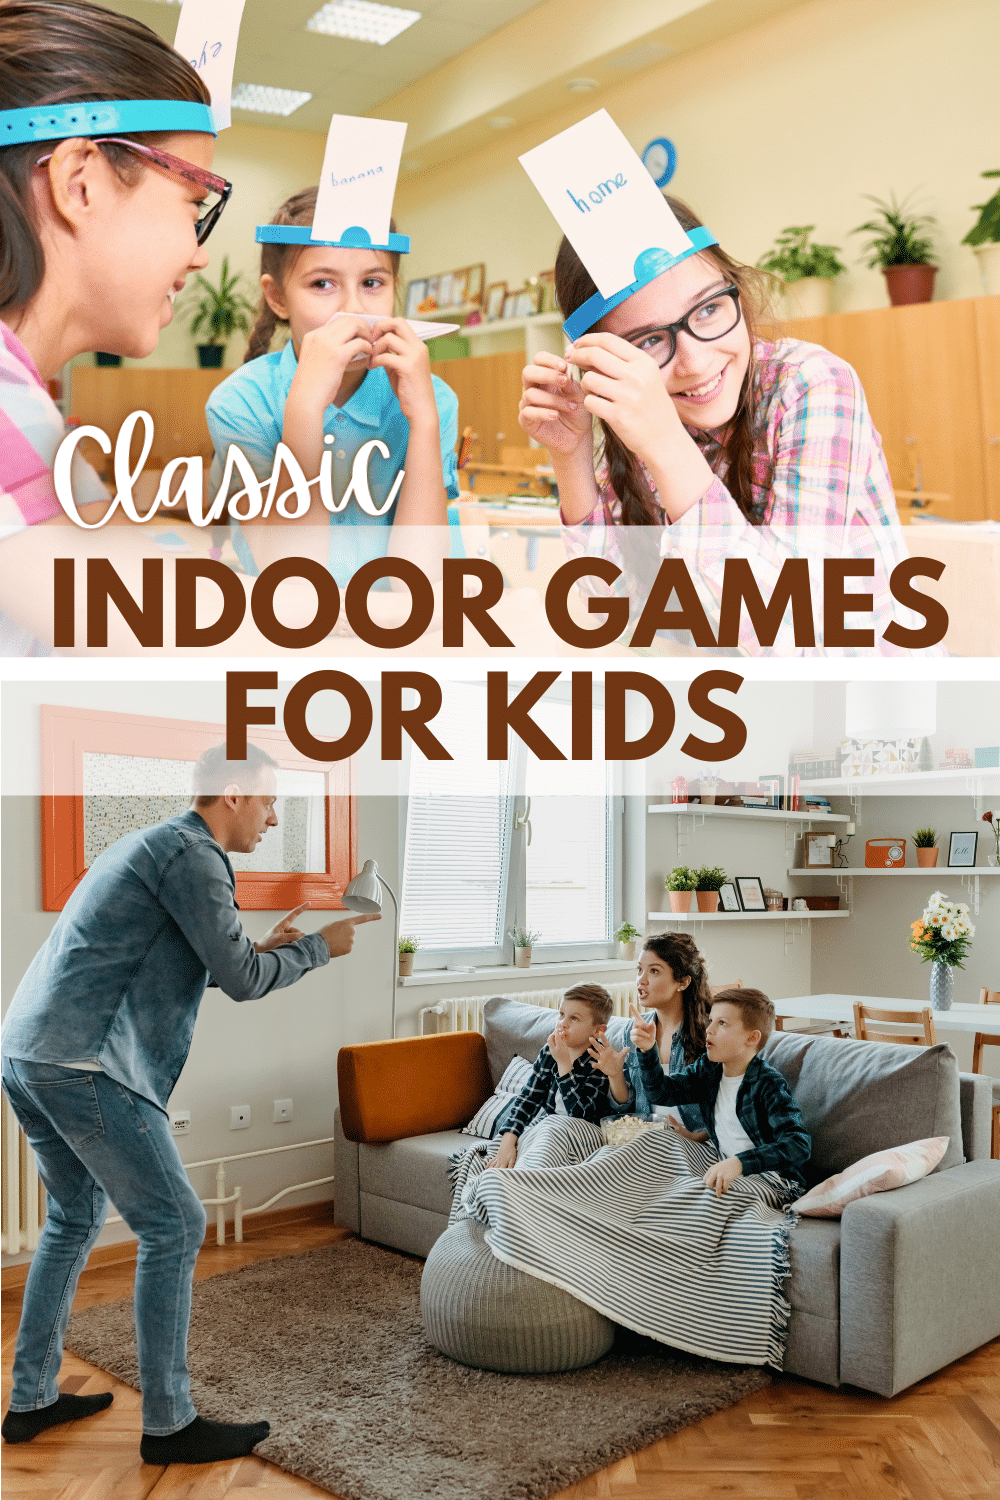 Next time the weather has you housebound, introduce your children to these classic indoor games for kids. These games are just as much fun as ever! #forkids #indoorgames #gamesforkids #kidsactivities via @wondermomwannab